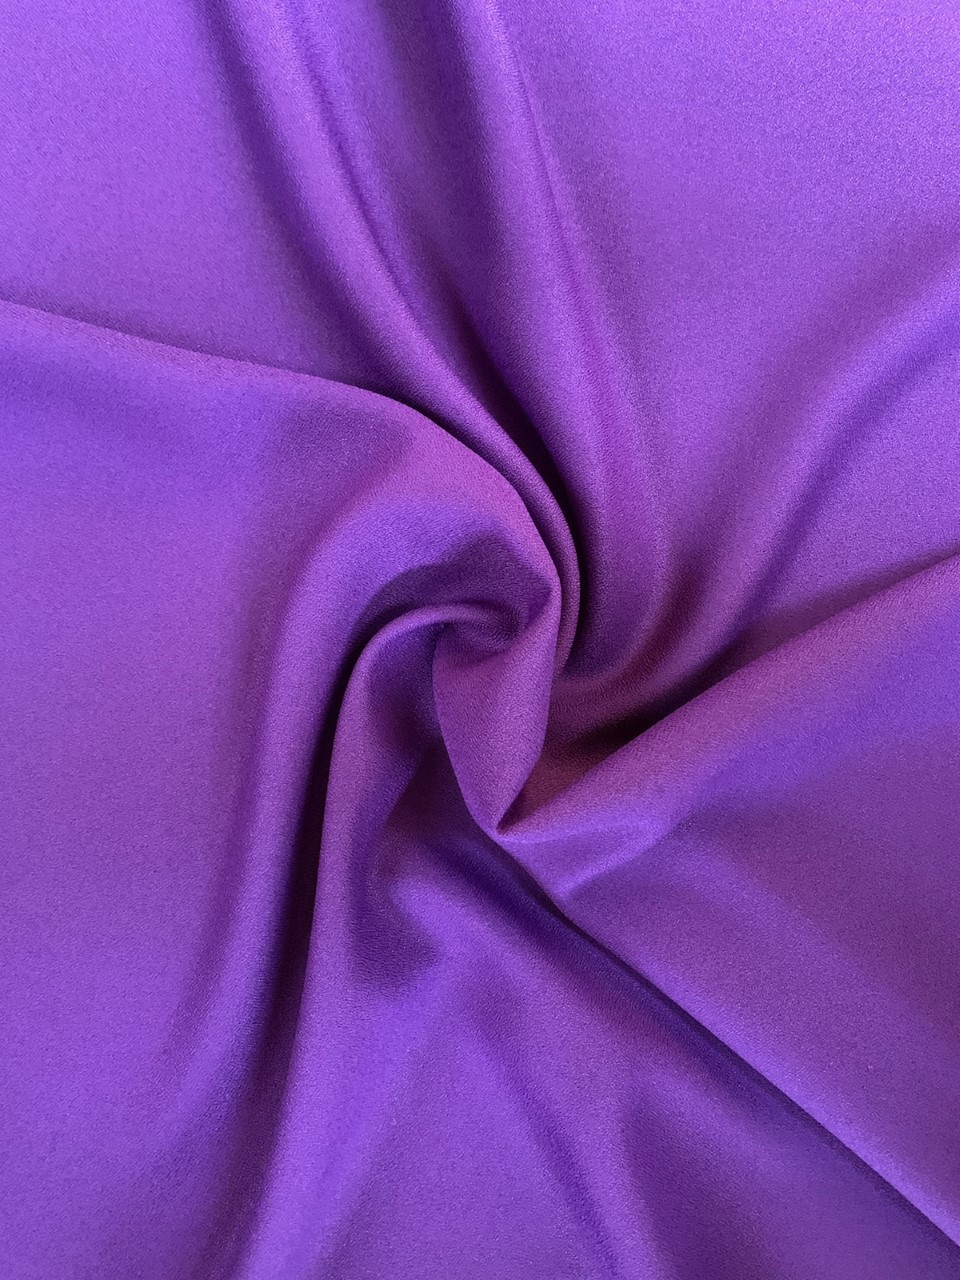 60" Wide Purple Crepe-By the yard (100% Polyester)